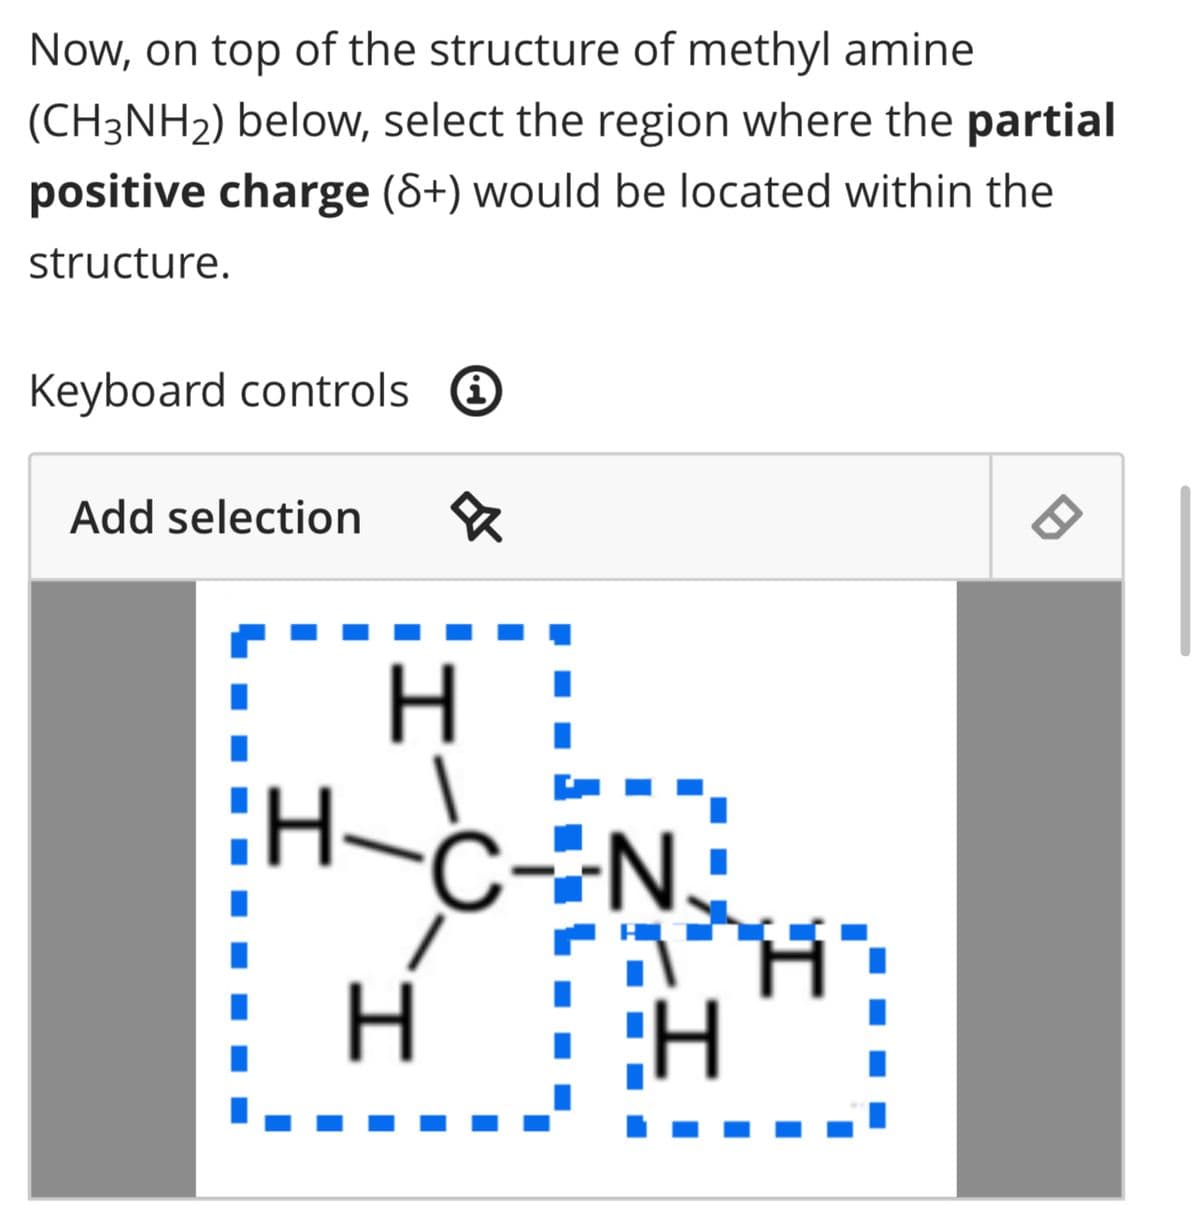 Now, on top of the structure of methyl amine
(CH3NH₂) below, select the region where the partial
positive charge (8+) would be located within the
structure.
Keyboard controls
Add selection &
I
H
H
C-N.
H
H
8